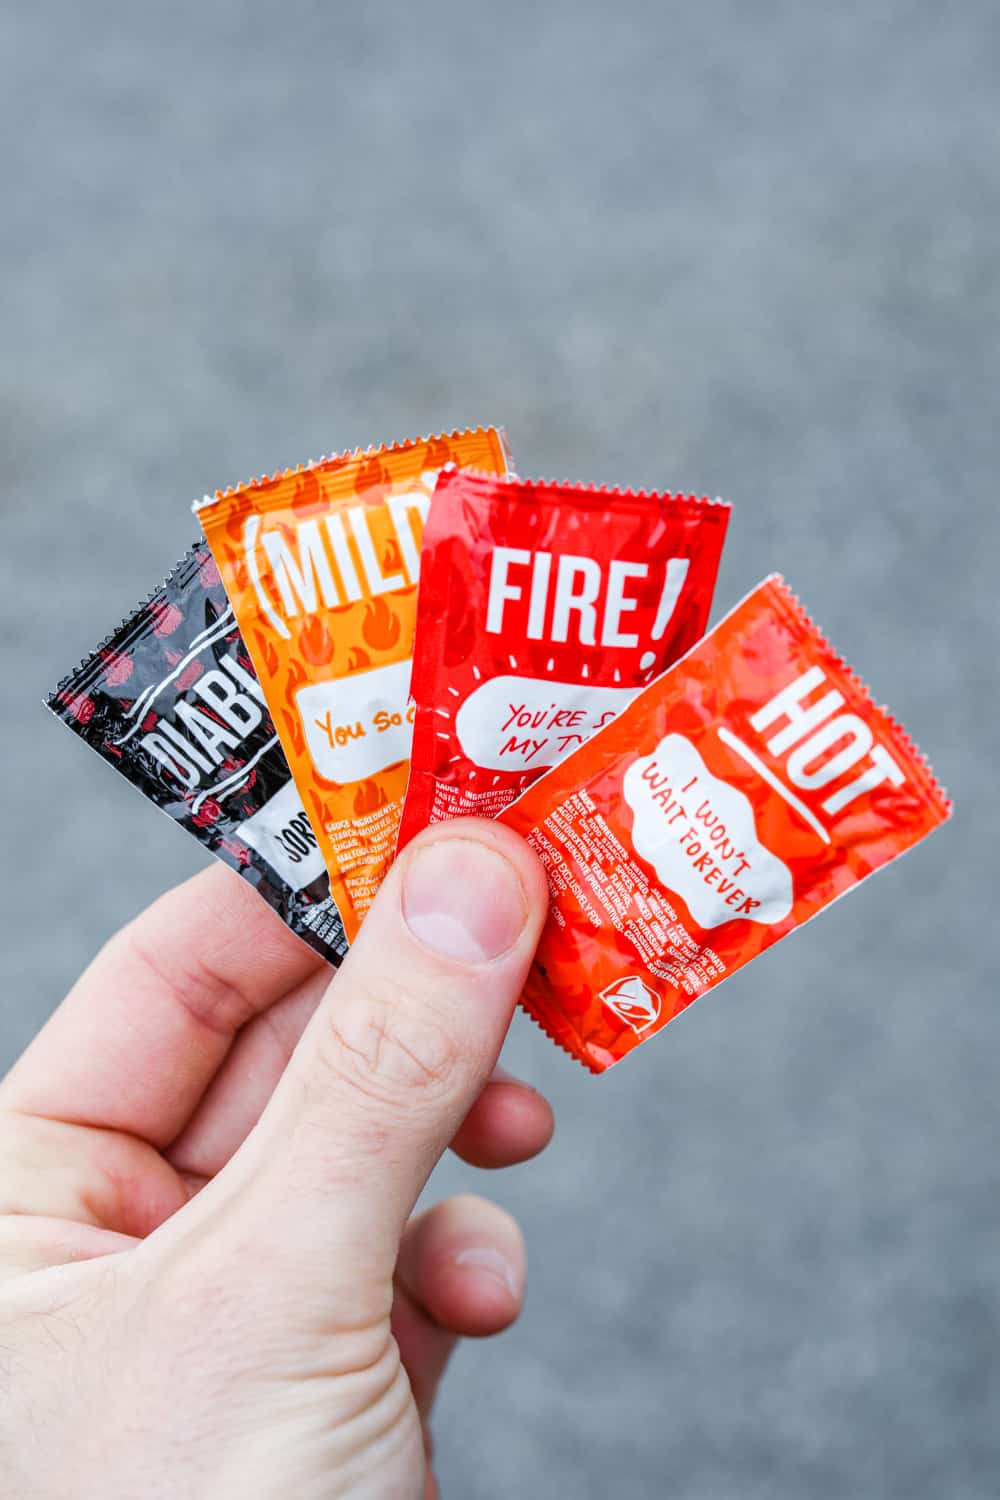 Hot sauces from Taco Bell.